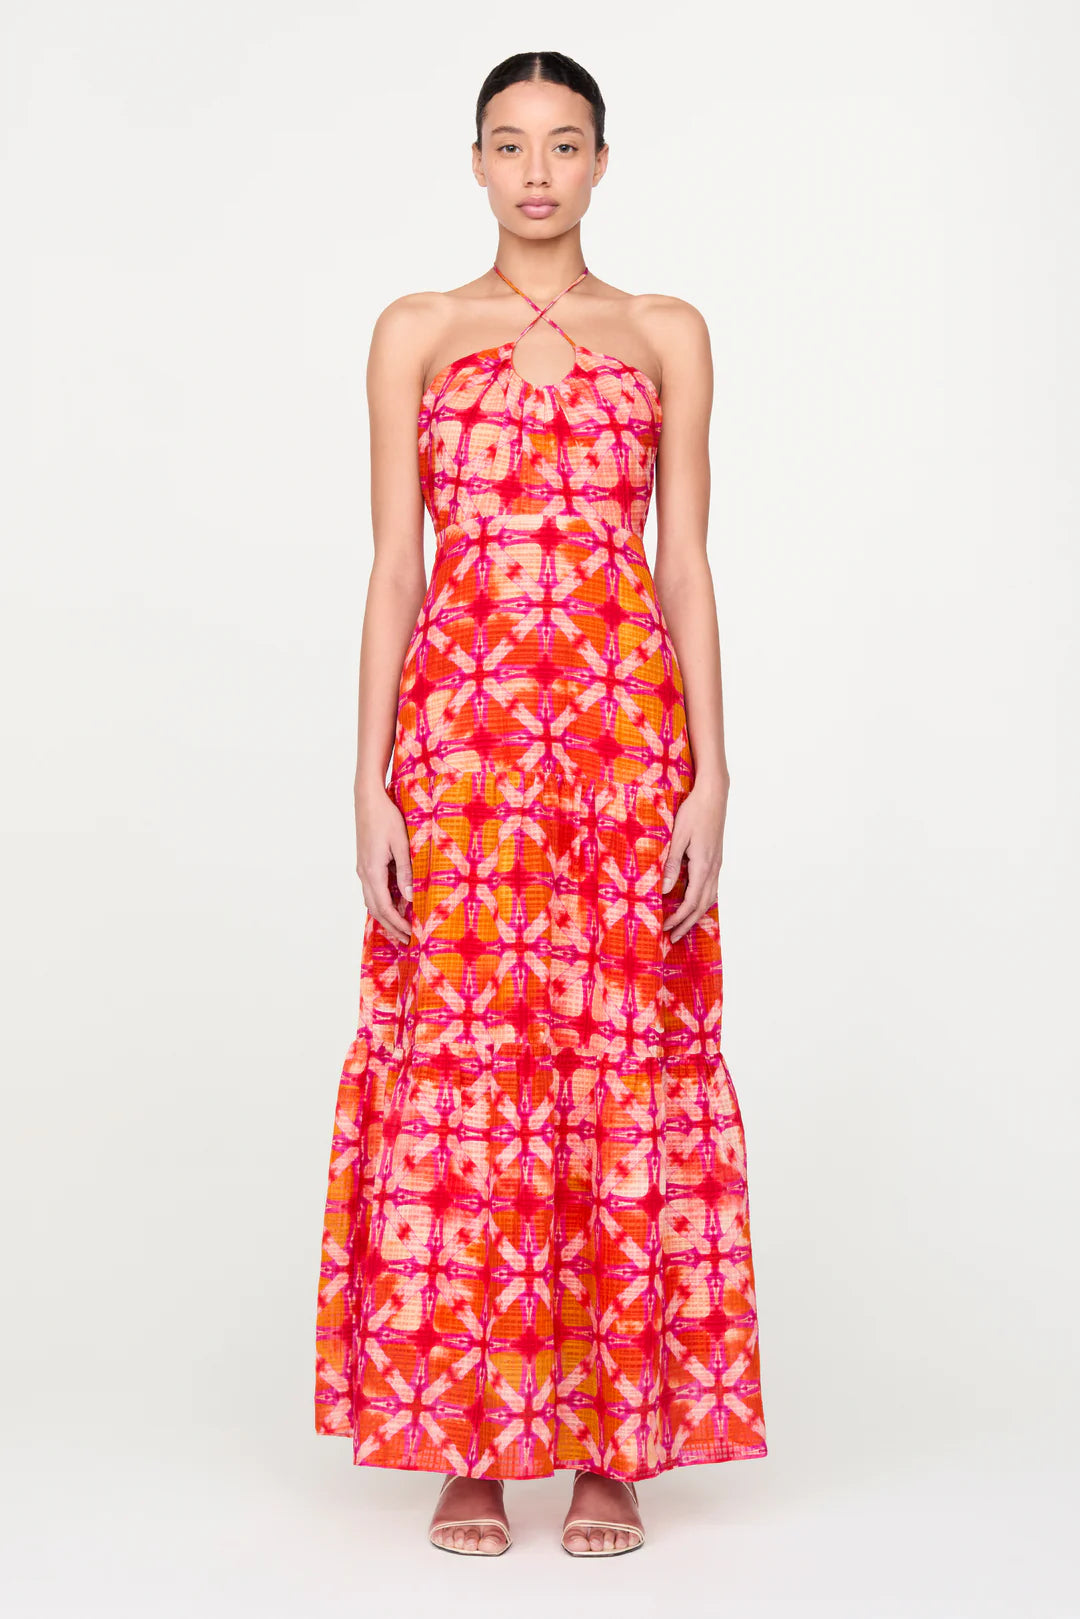 Zenna Dress by Marie Oliver in Guava